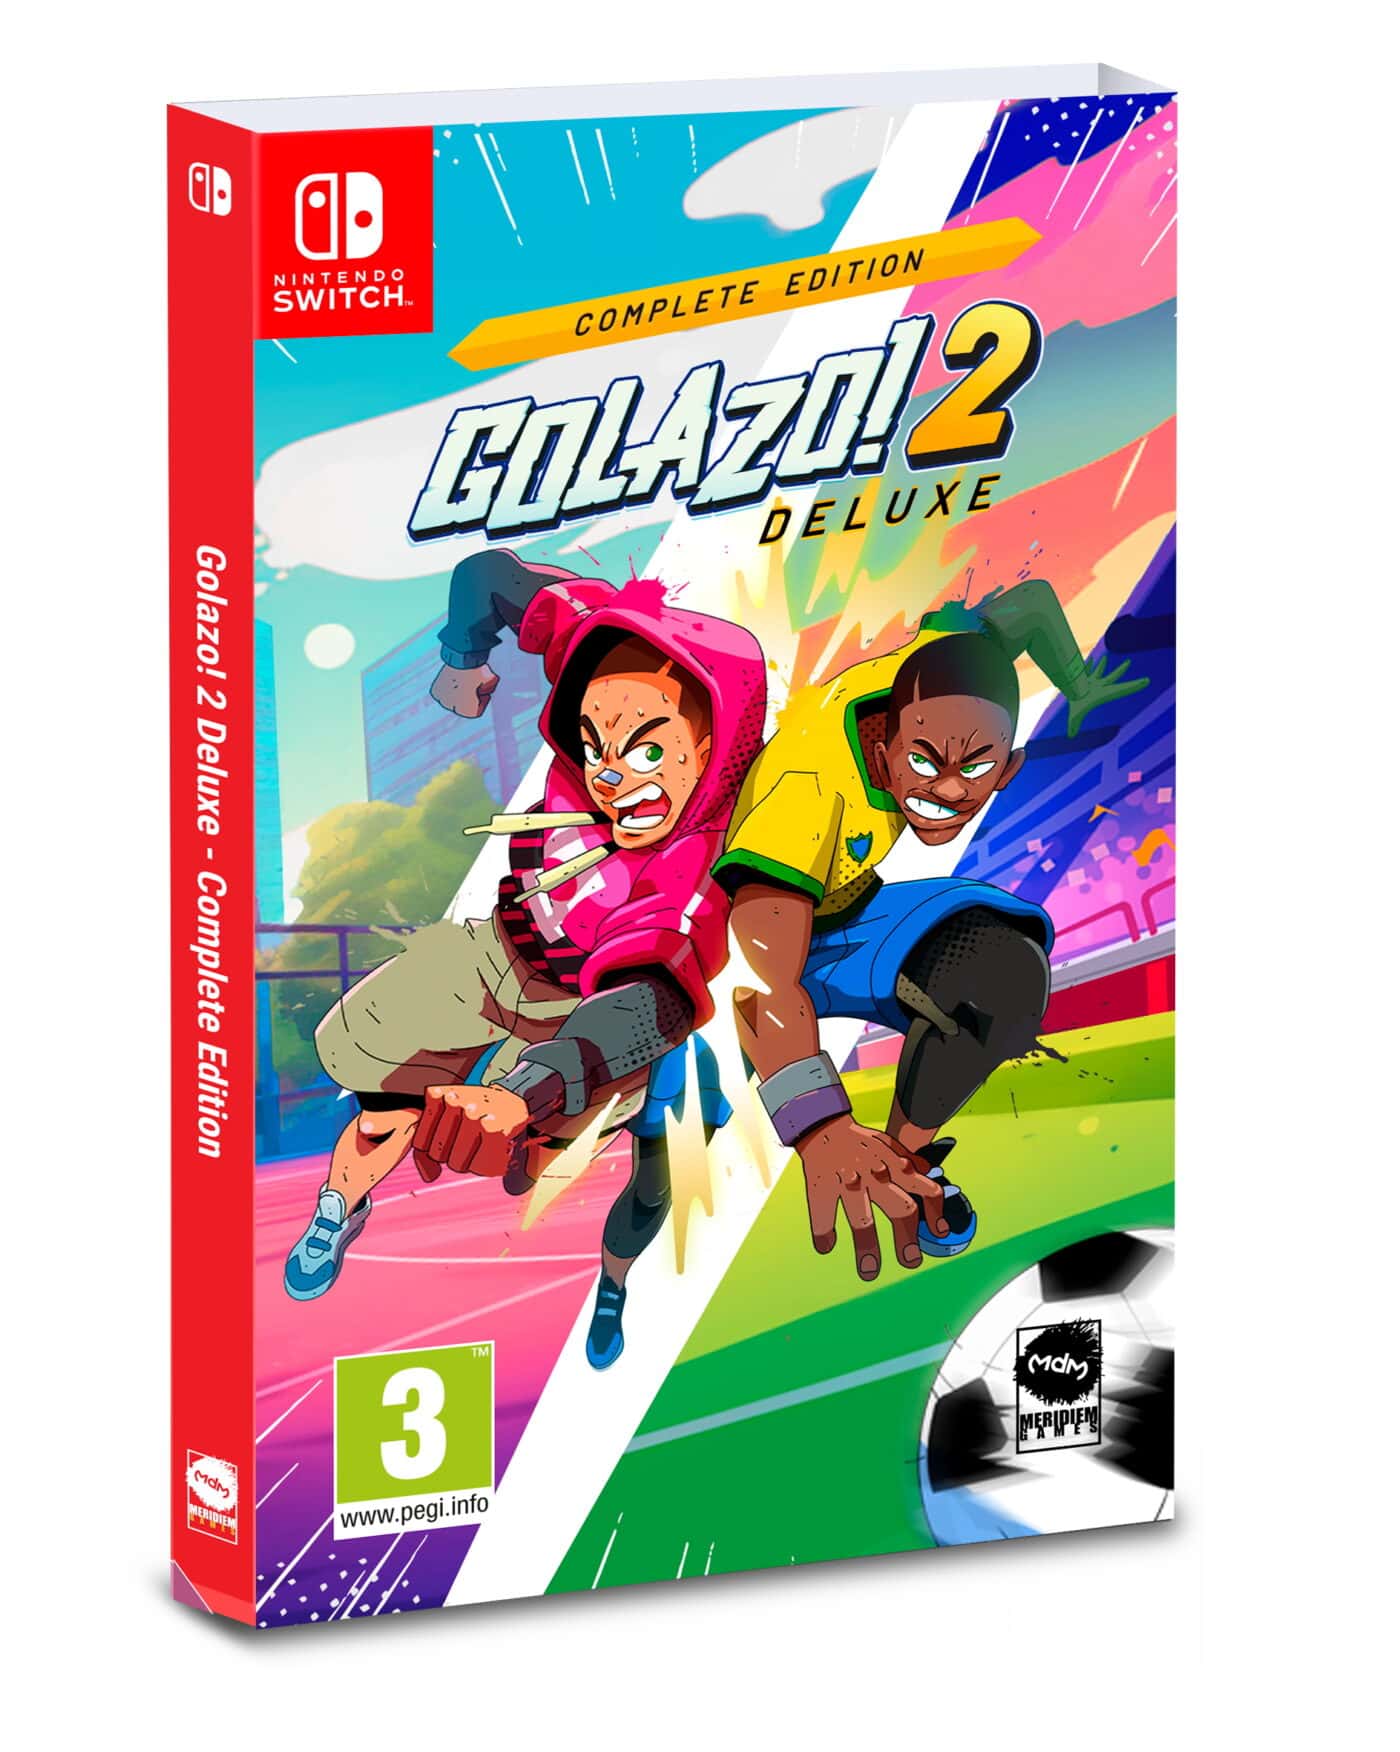 Golazo! 2 Deluxe - Complete Edition pour Switch et PS5